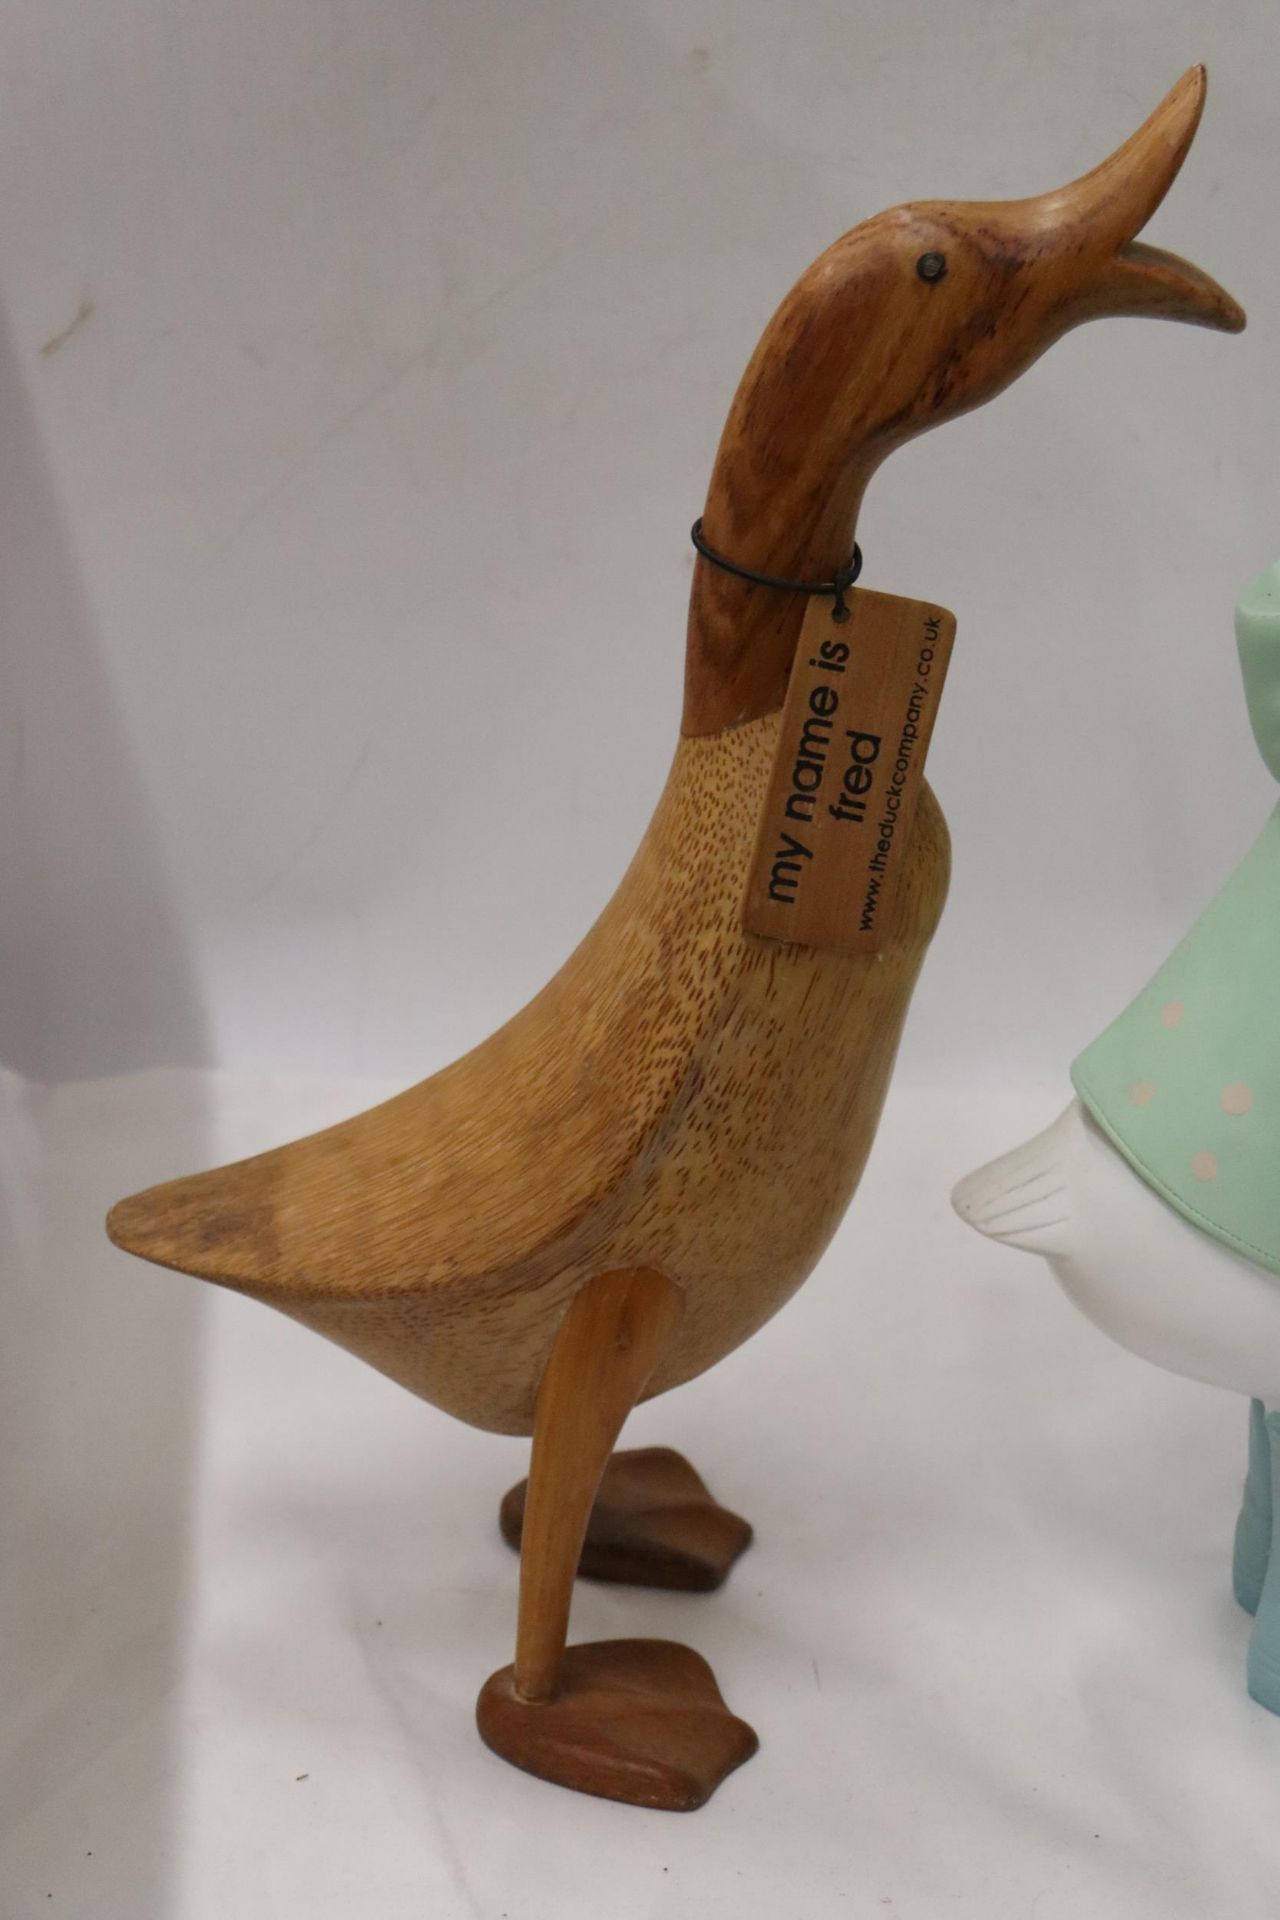 A WOODEN DUCK FROM 'THE DUCK COMPANY' CALLED FRED PLUS A PAINTED DUCK, HEIGHTS 42CM - Bild 3 aus 7